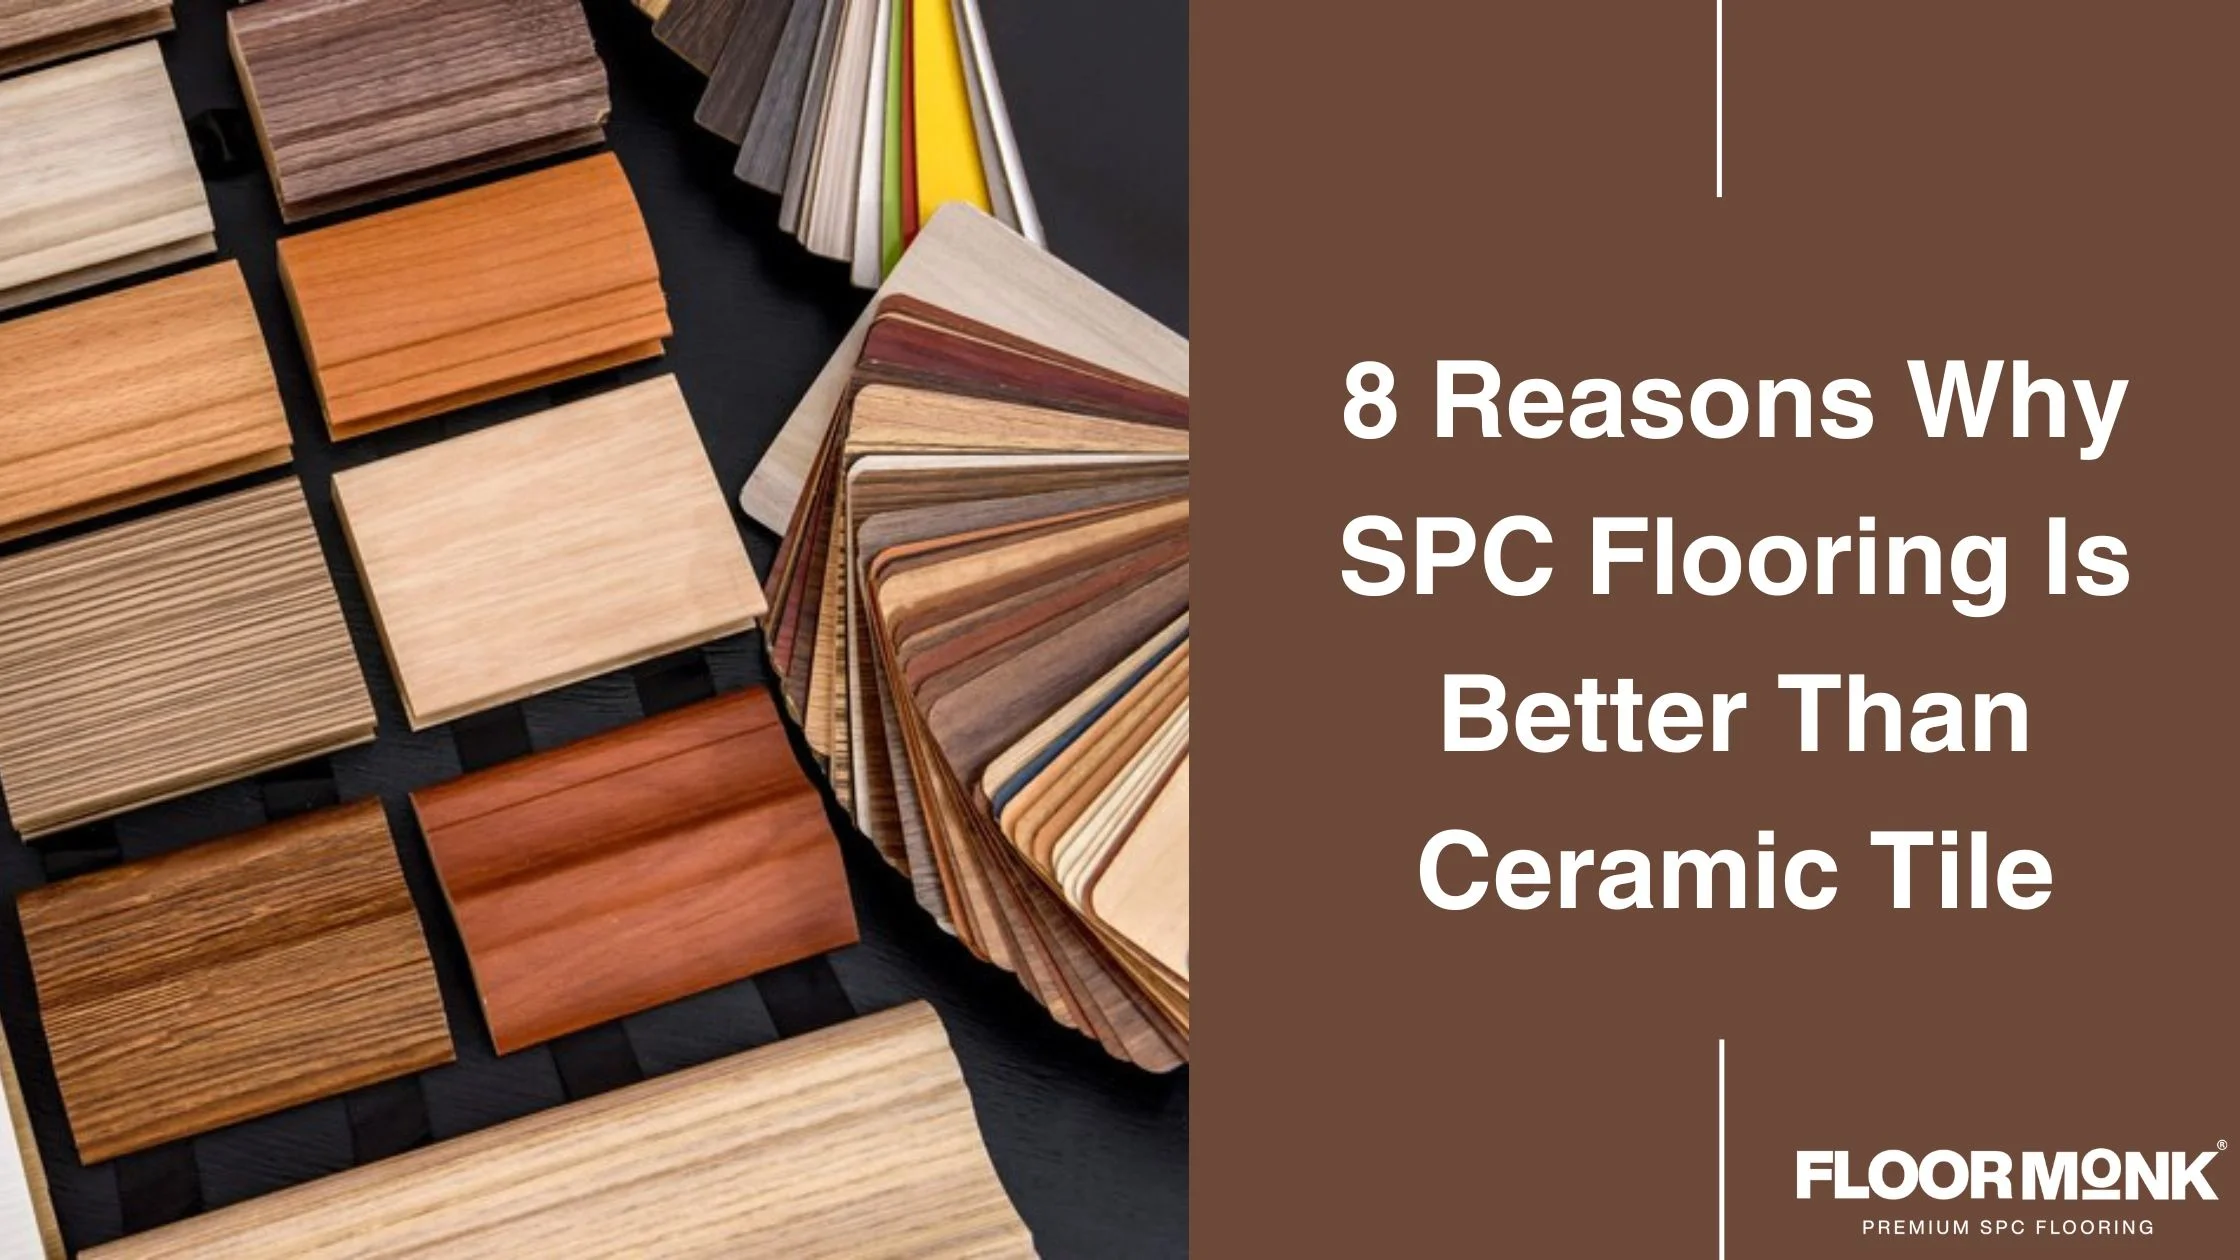 8 Reasons Why SPC Flooring Is Better Than Ceramic Tile